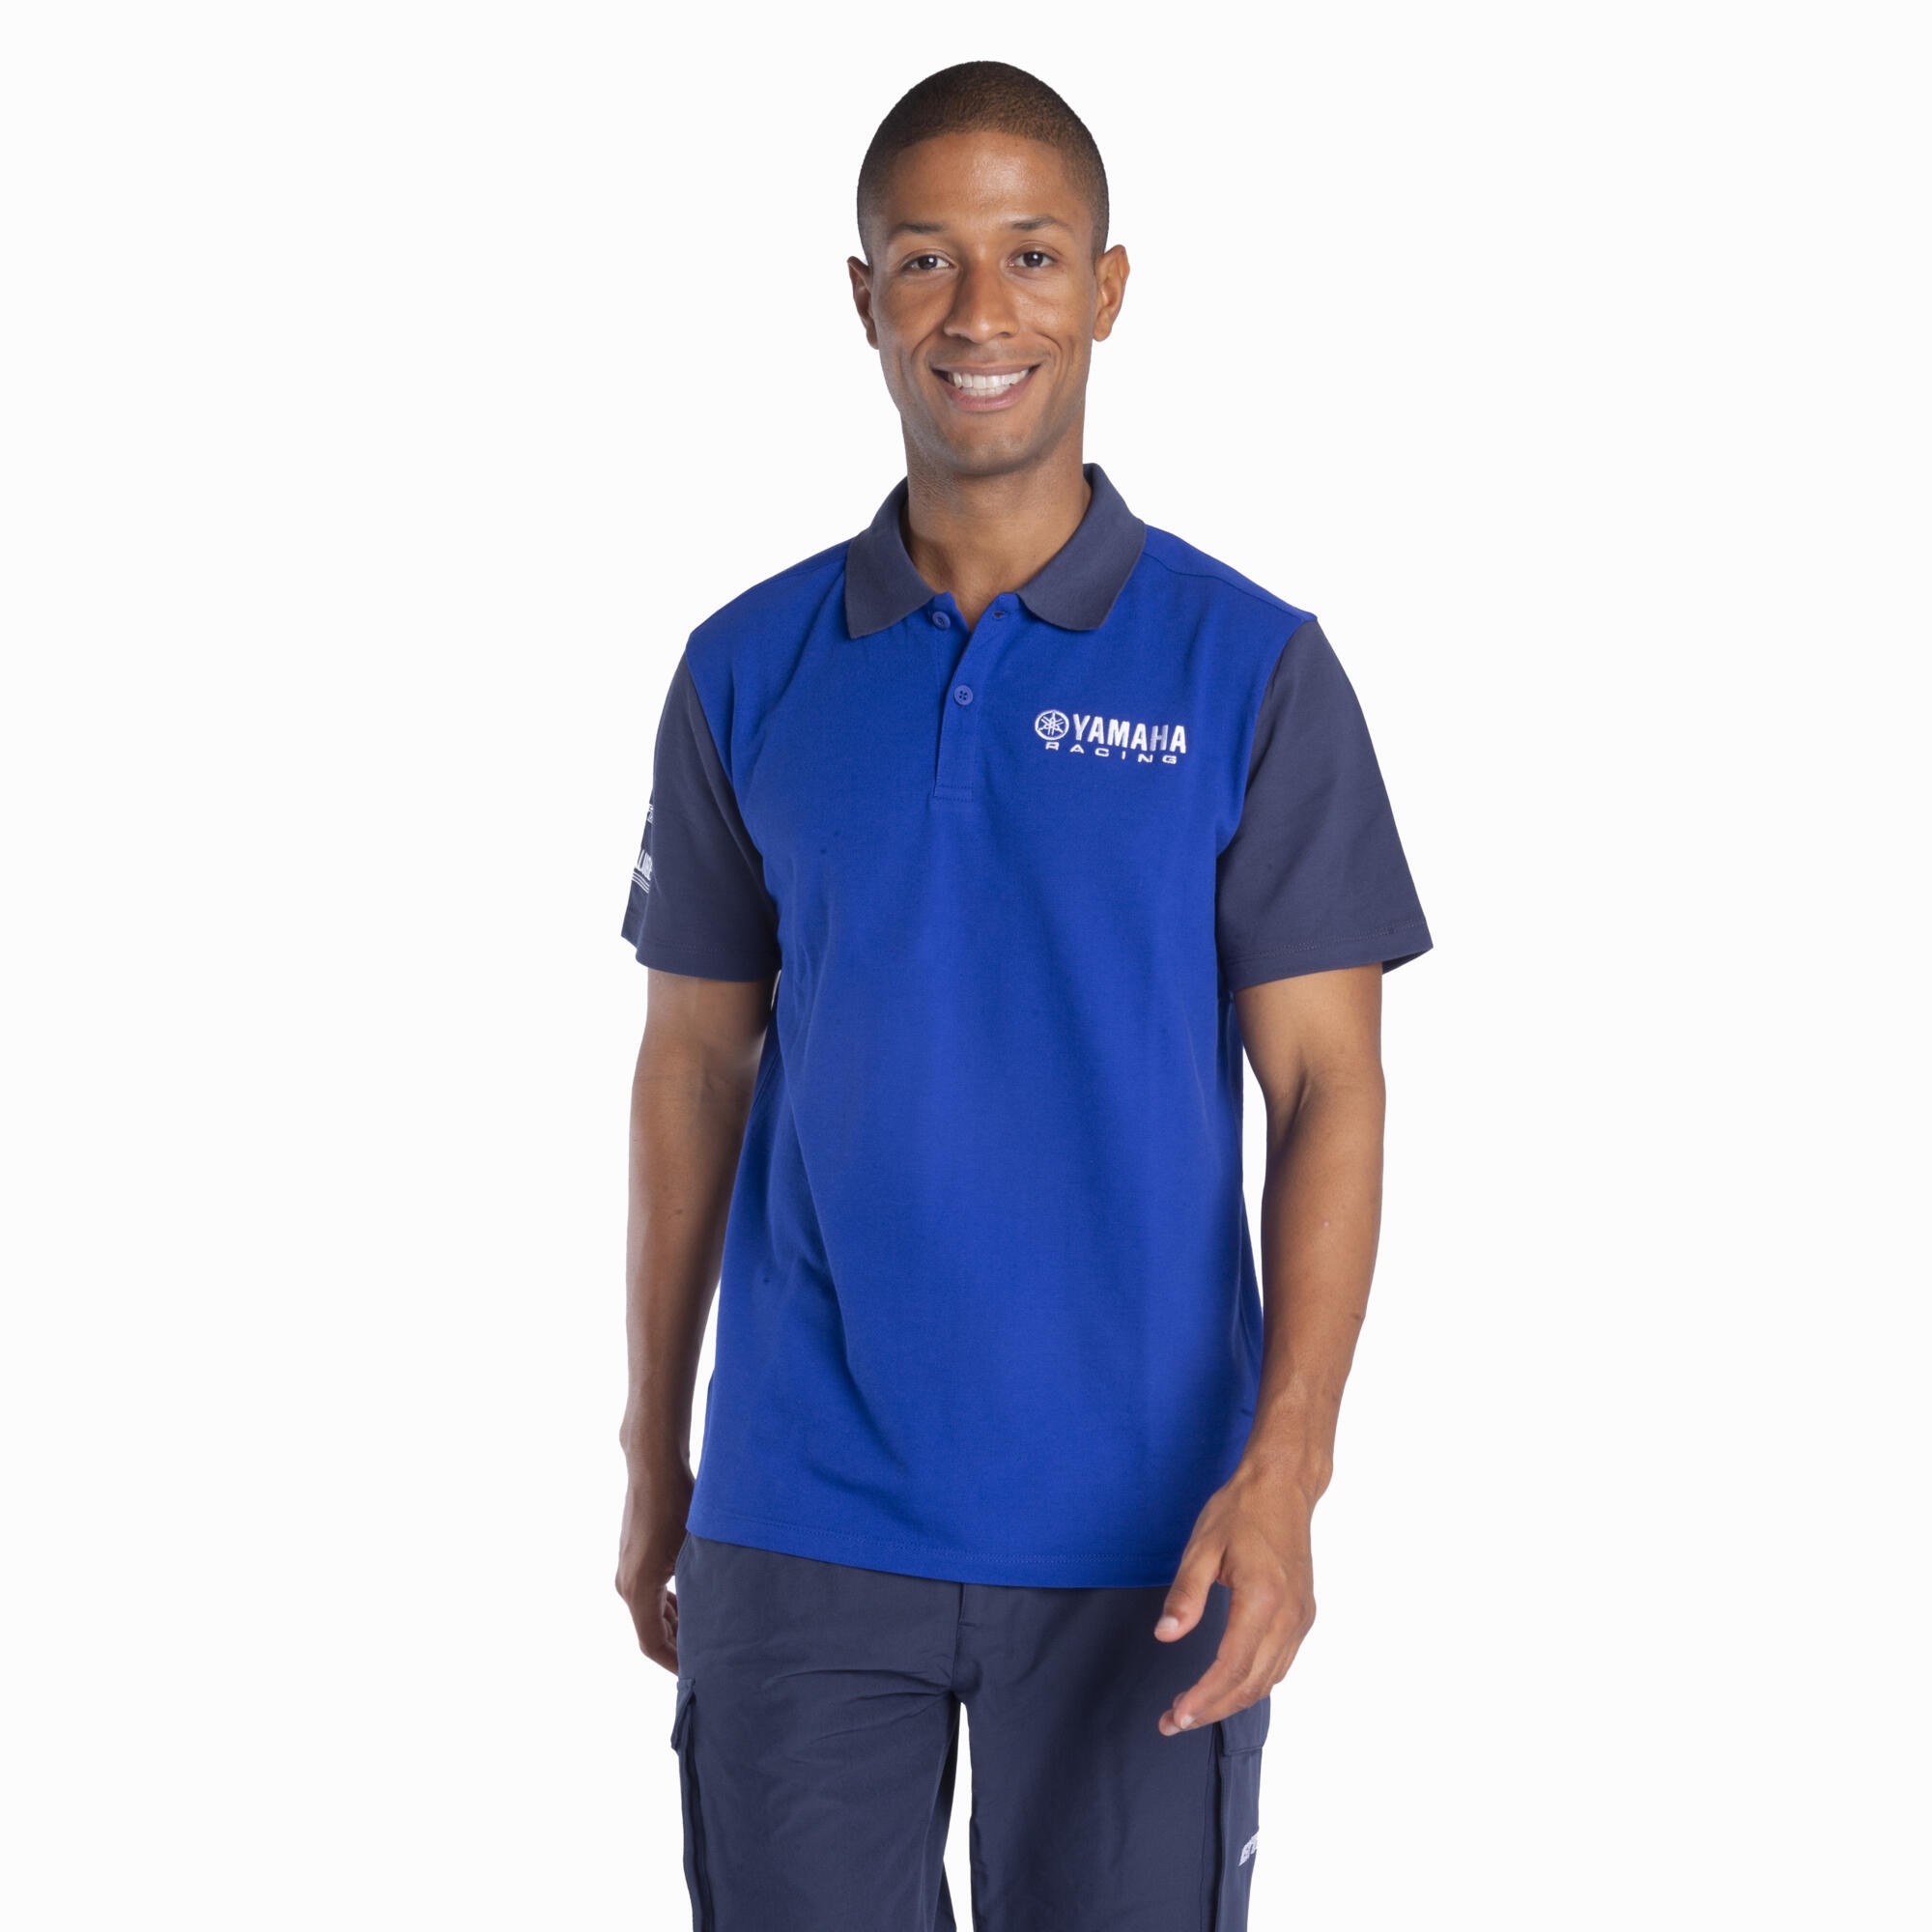 POLO HOMME PADDOCK BLUE